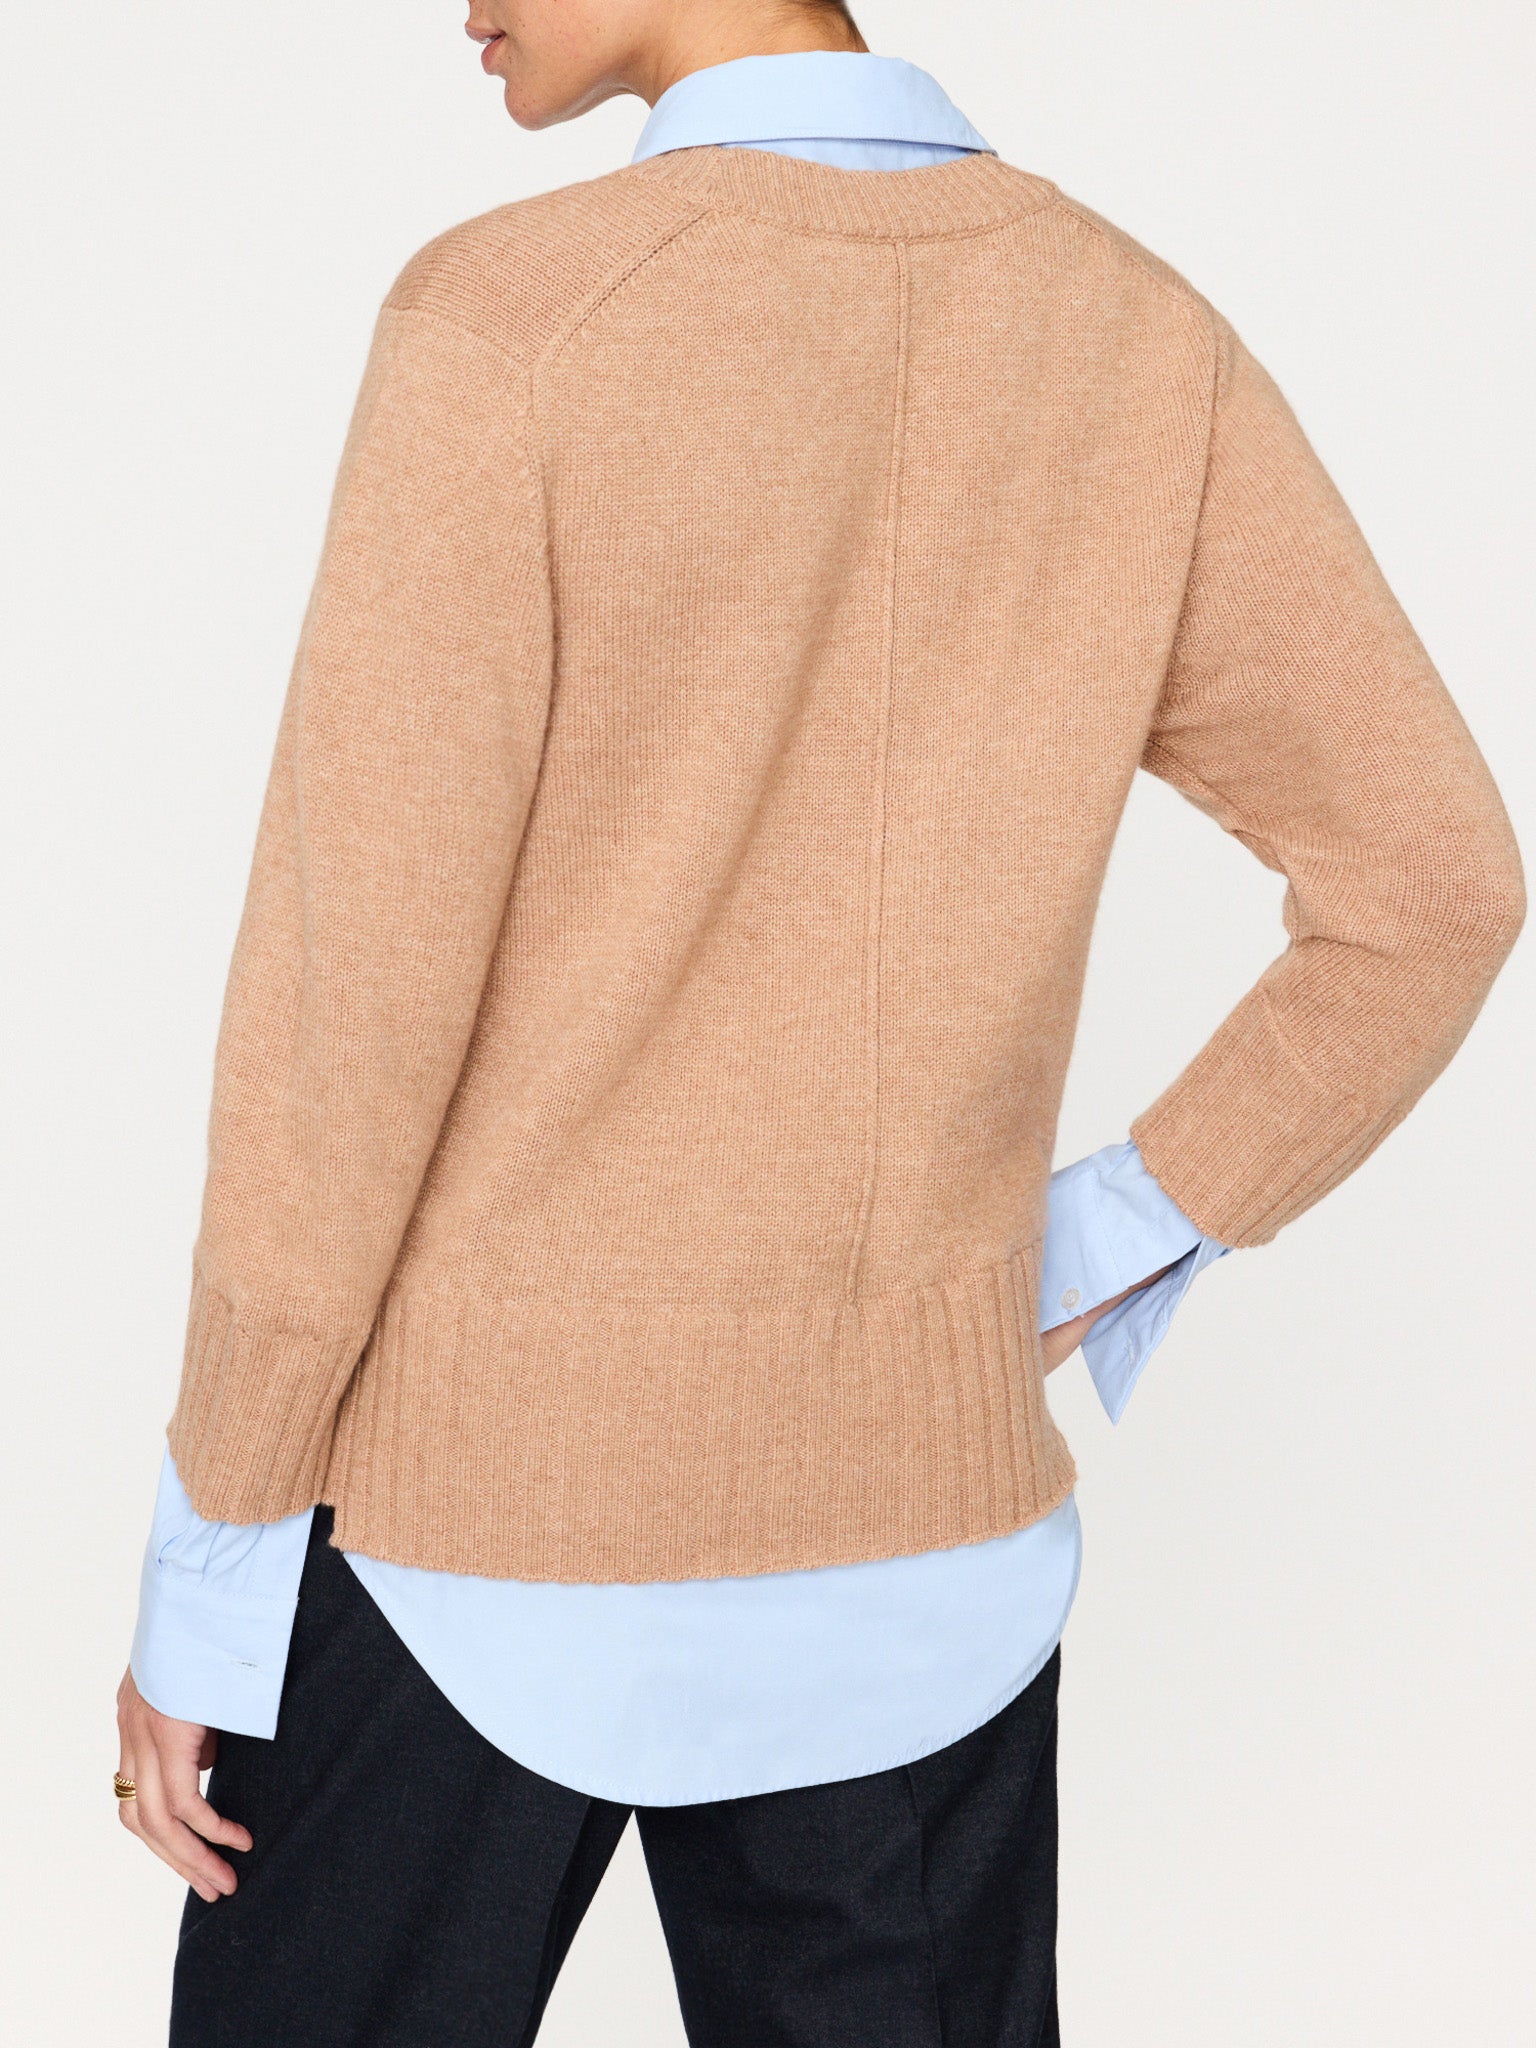 Arden tan with blue oxford layered v-neck sweater back view